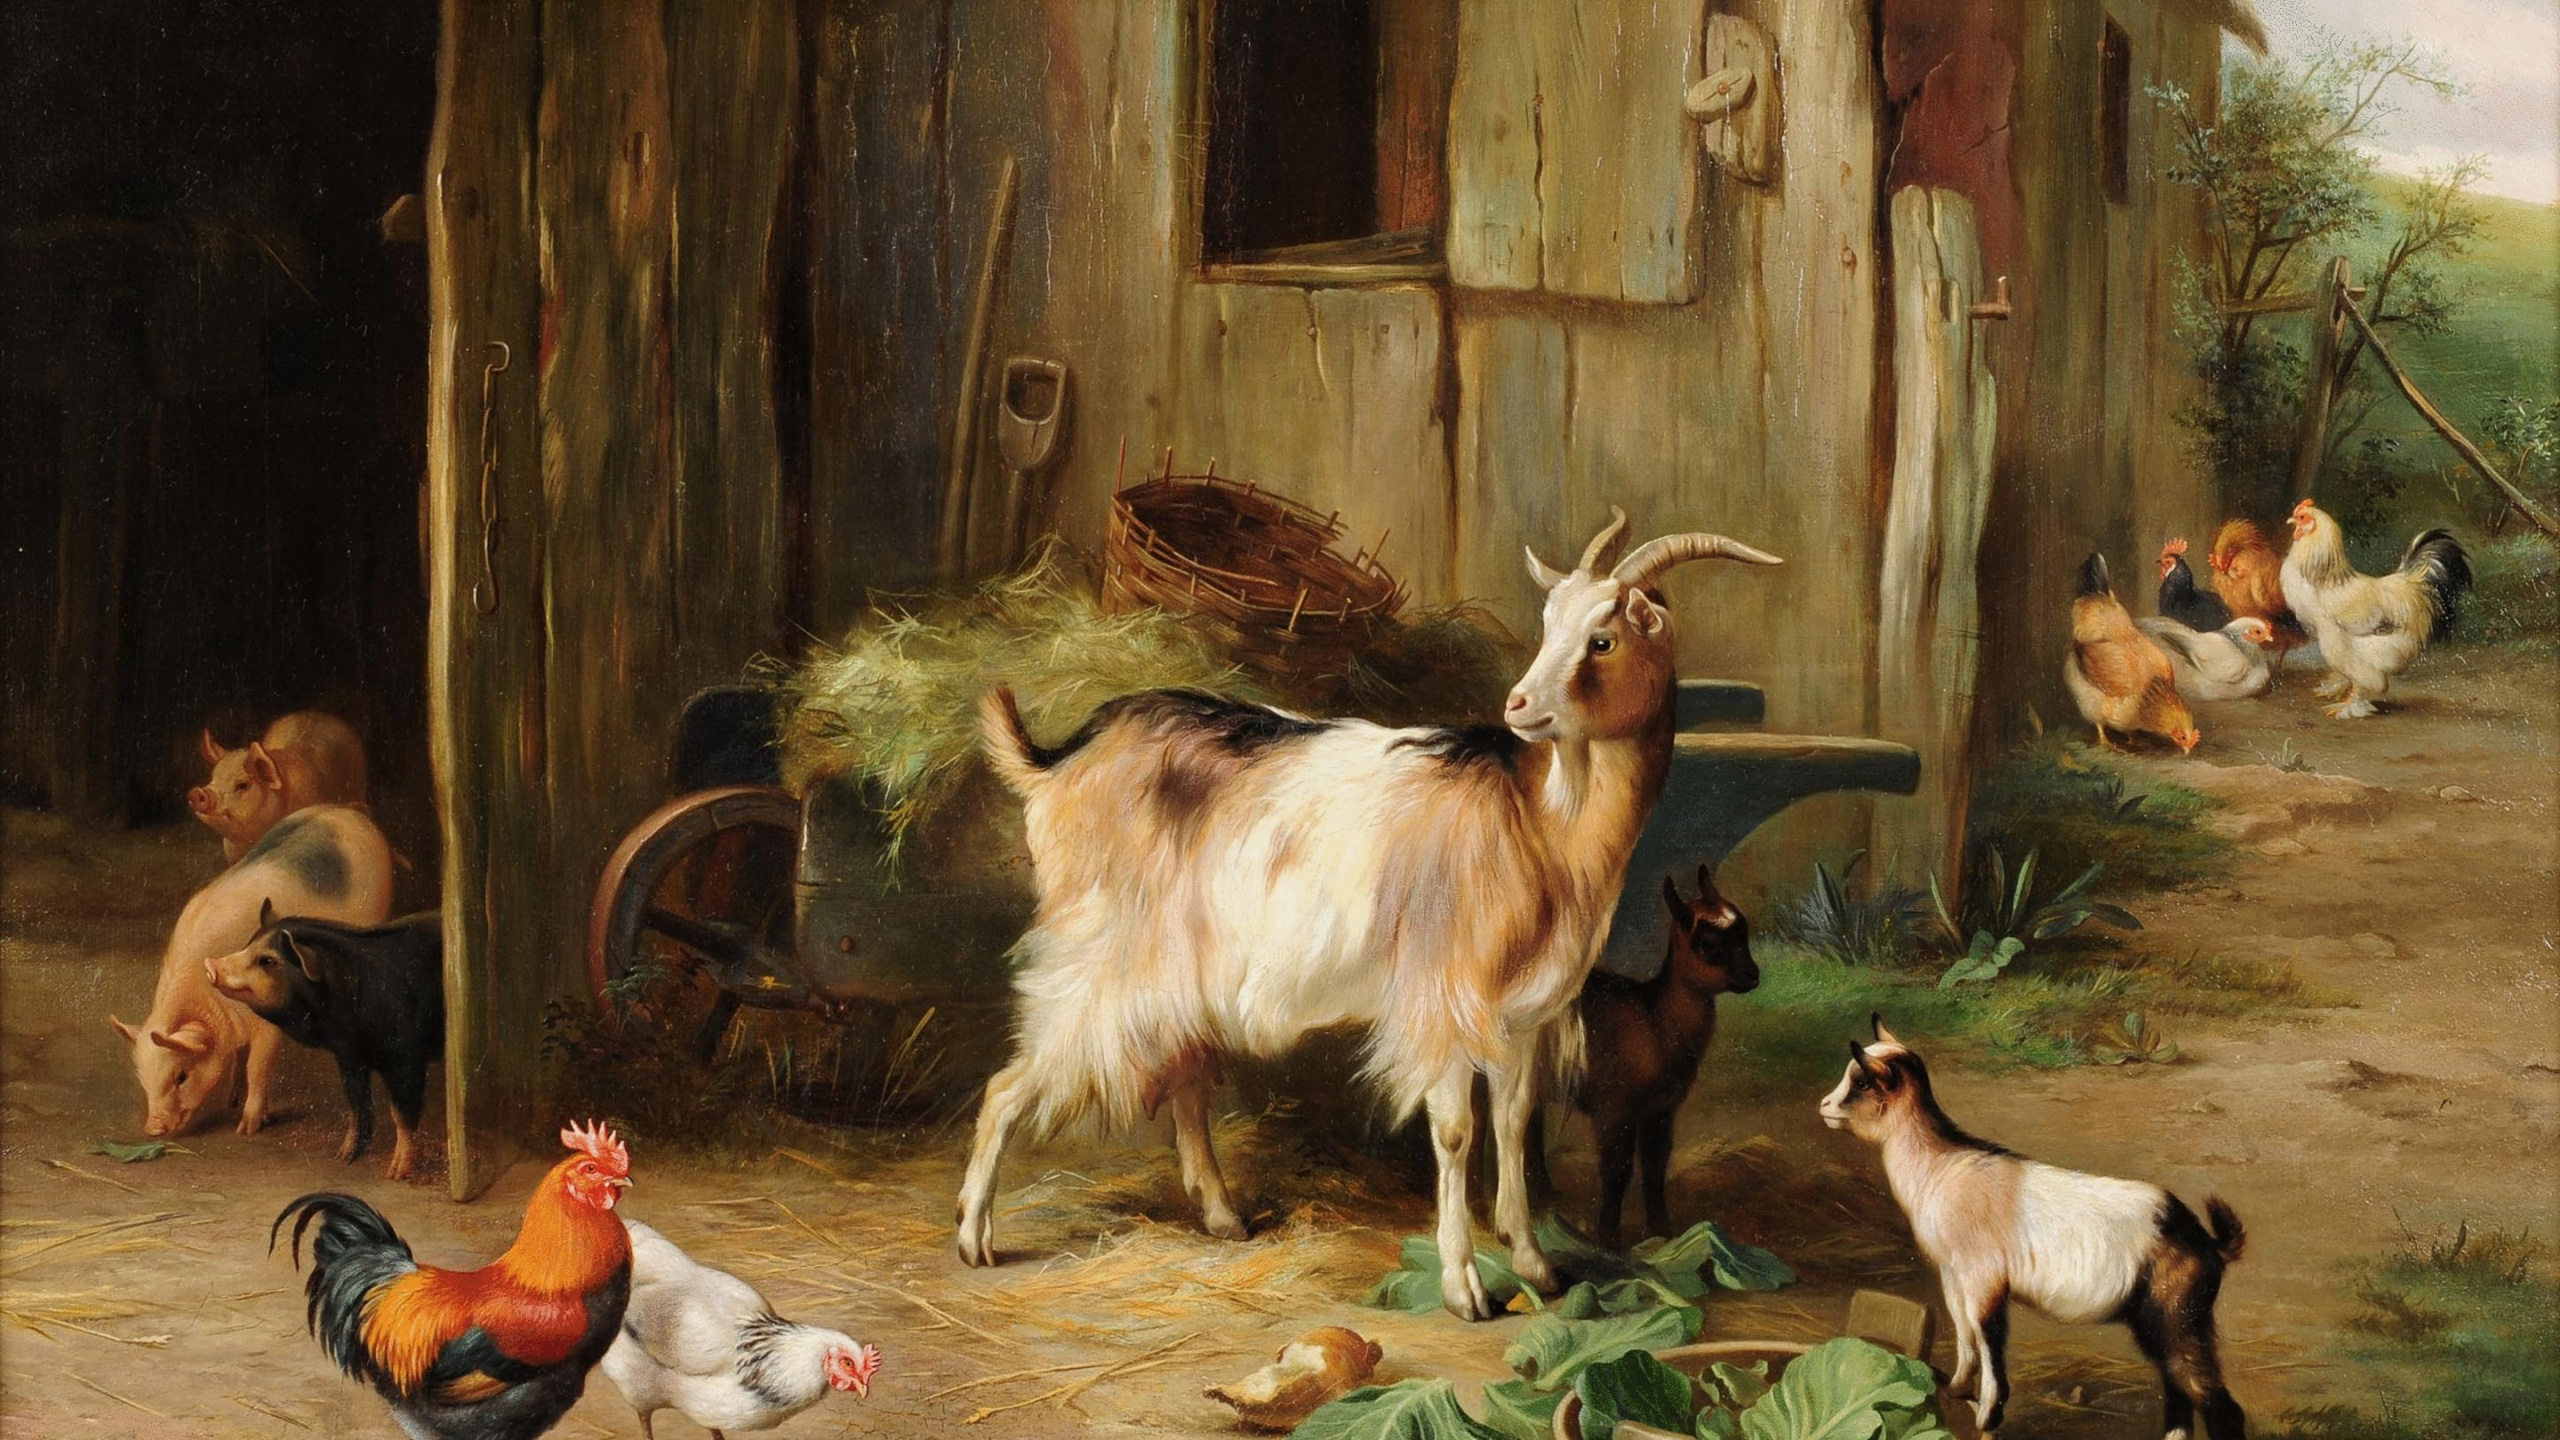 White and Brown Goats on Brown Wooden Cage. Wallpaper in 2560x1440 Resolution